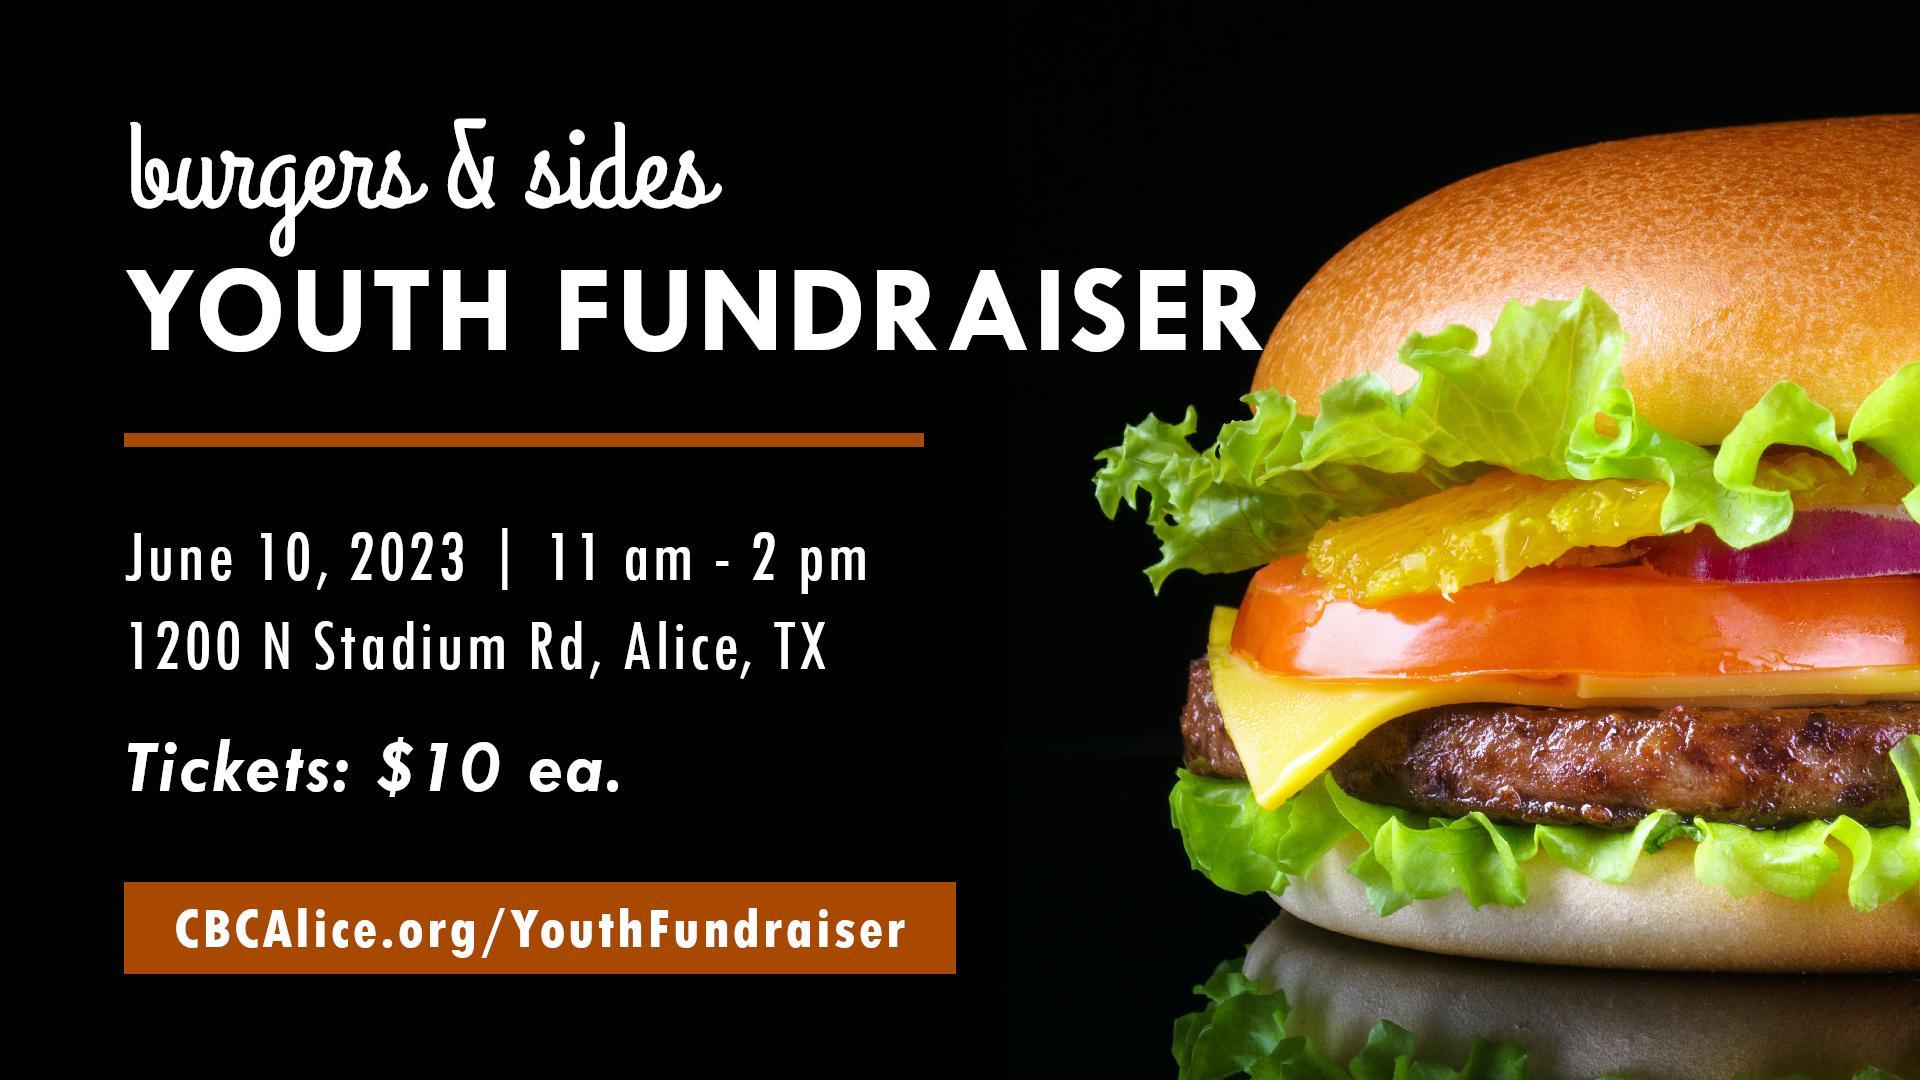 Hamburger and sides youth fundraiser on June 10, 2023 from 11 am to 2 pm at Cornerstone Baptist in Alice, Texas